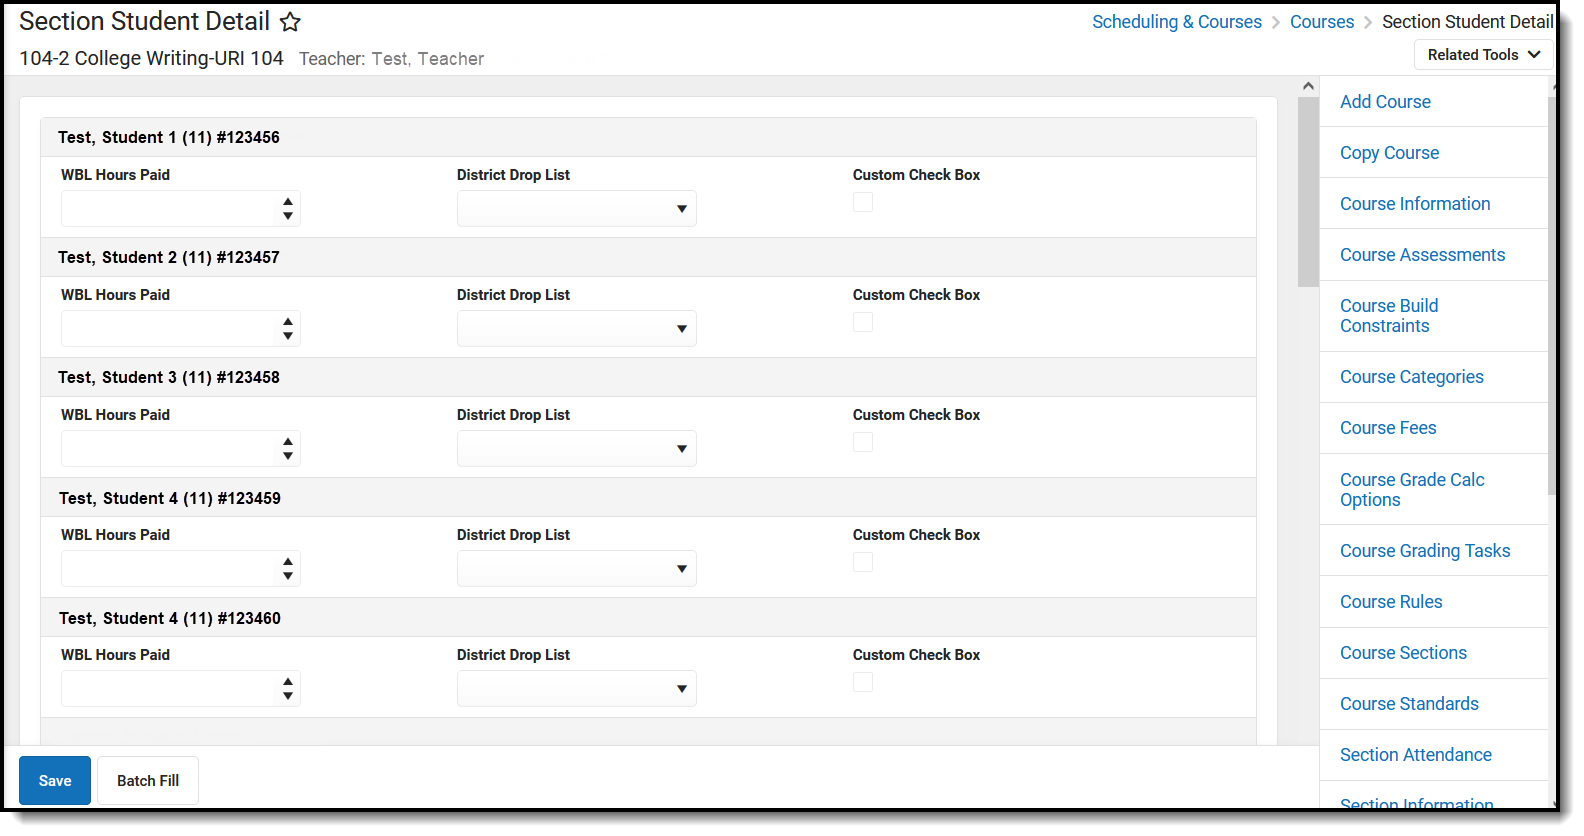 Screenshot of the Section Student Detail tool. 